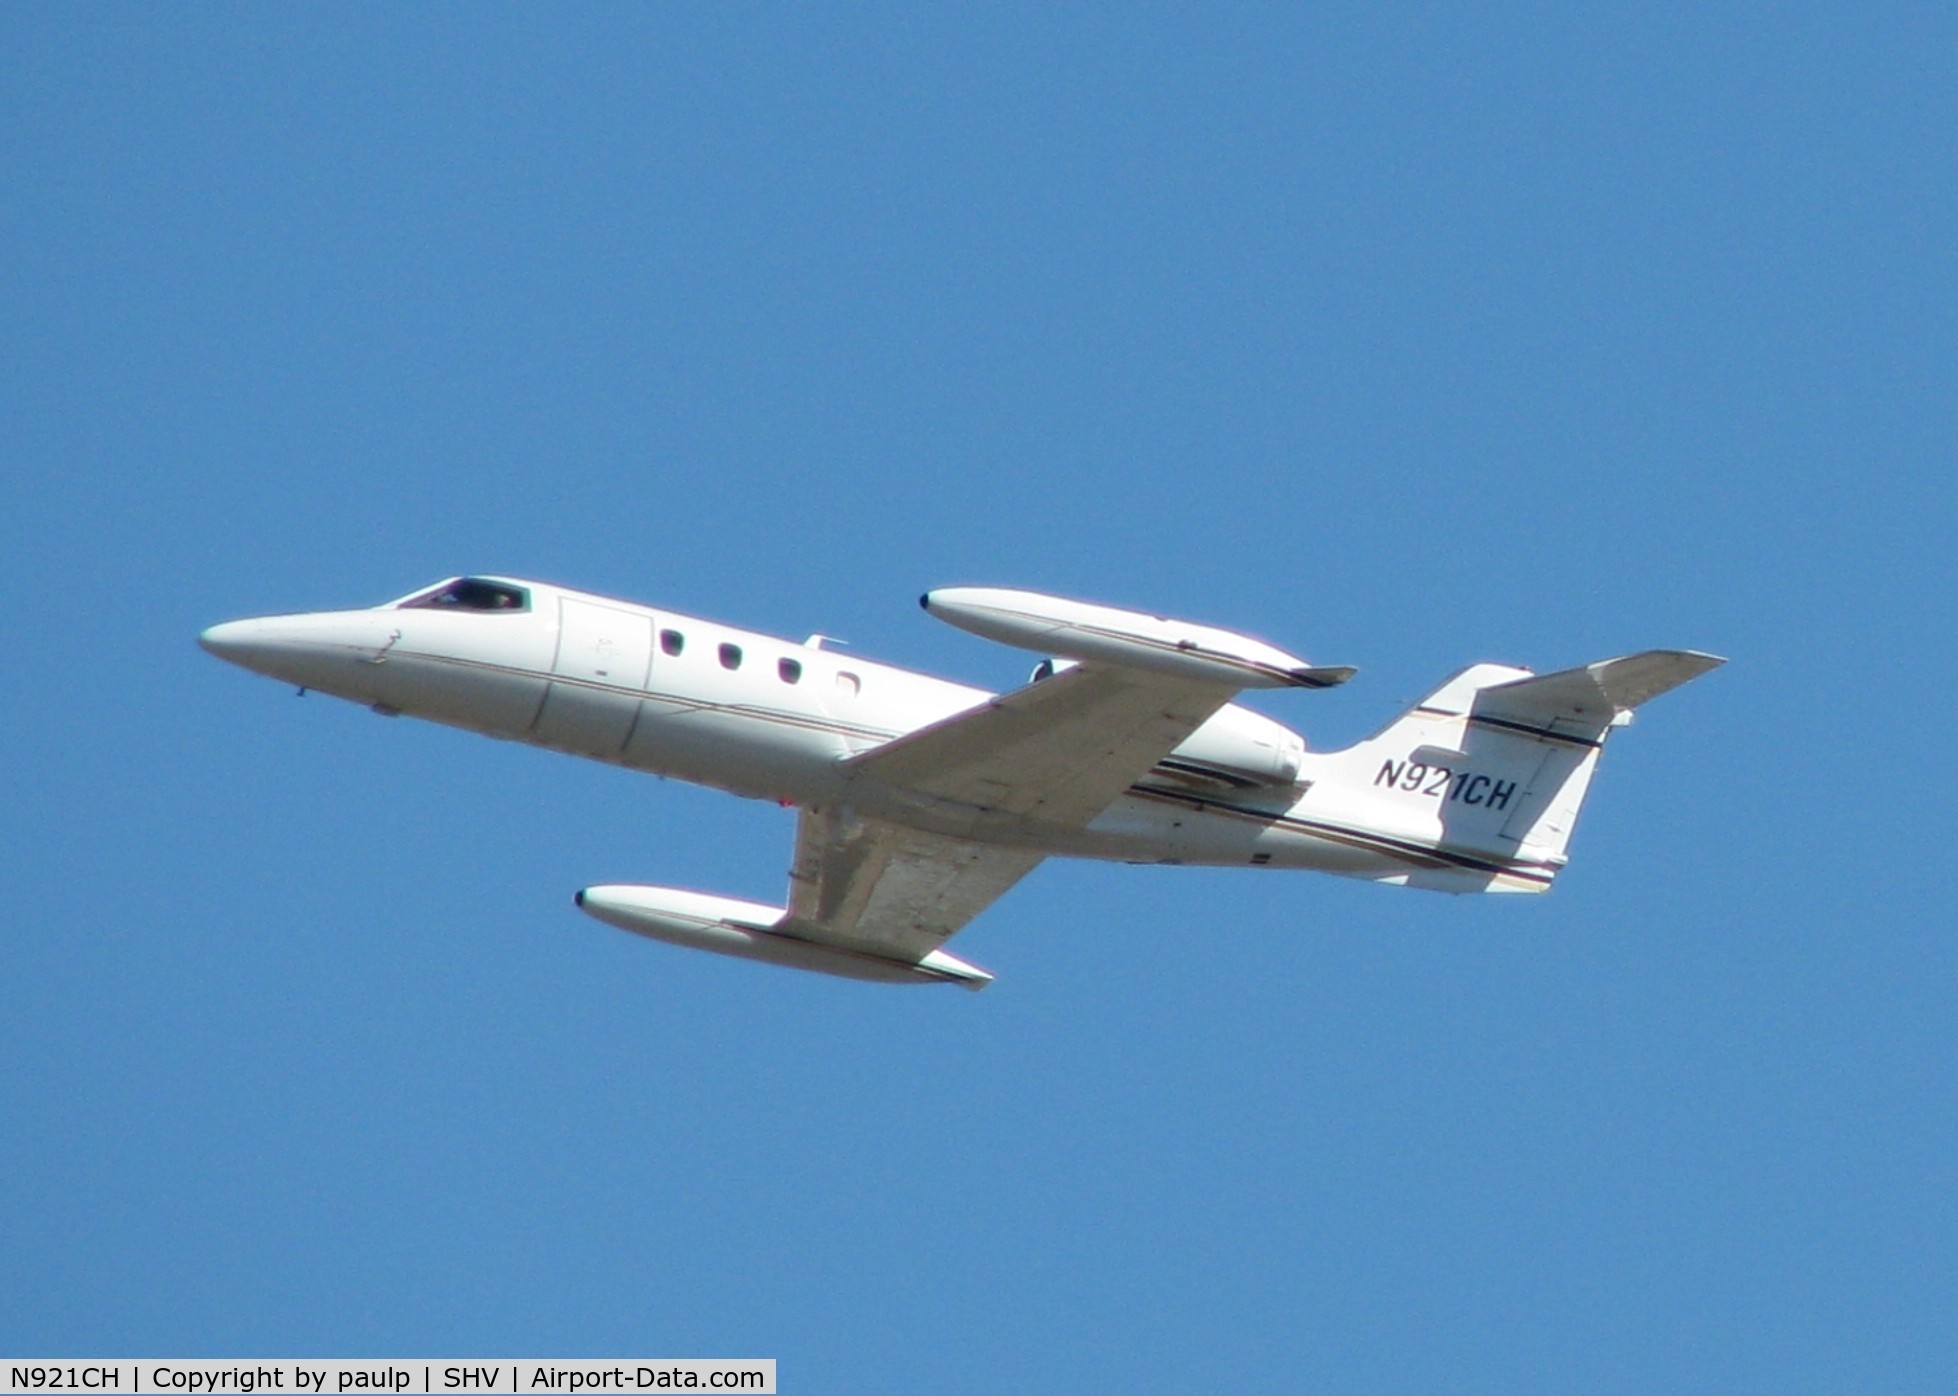 N921CH, 1979 Gates Learjet 35A C/N 228, Taking off from the Shreveport Regional airport.